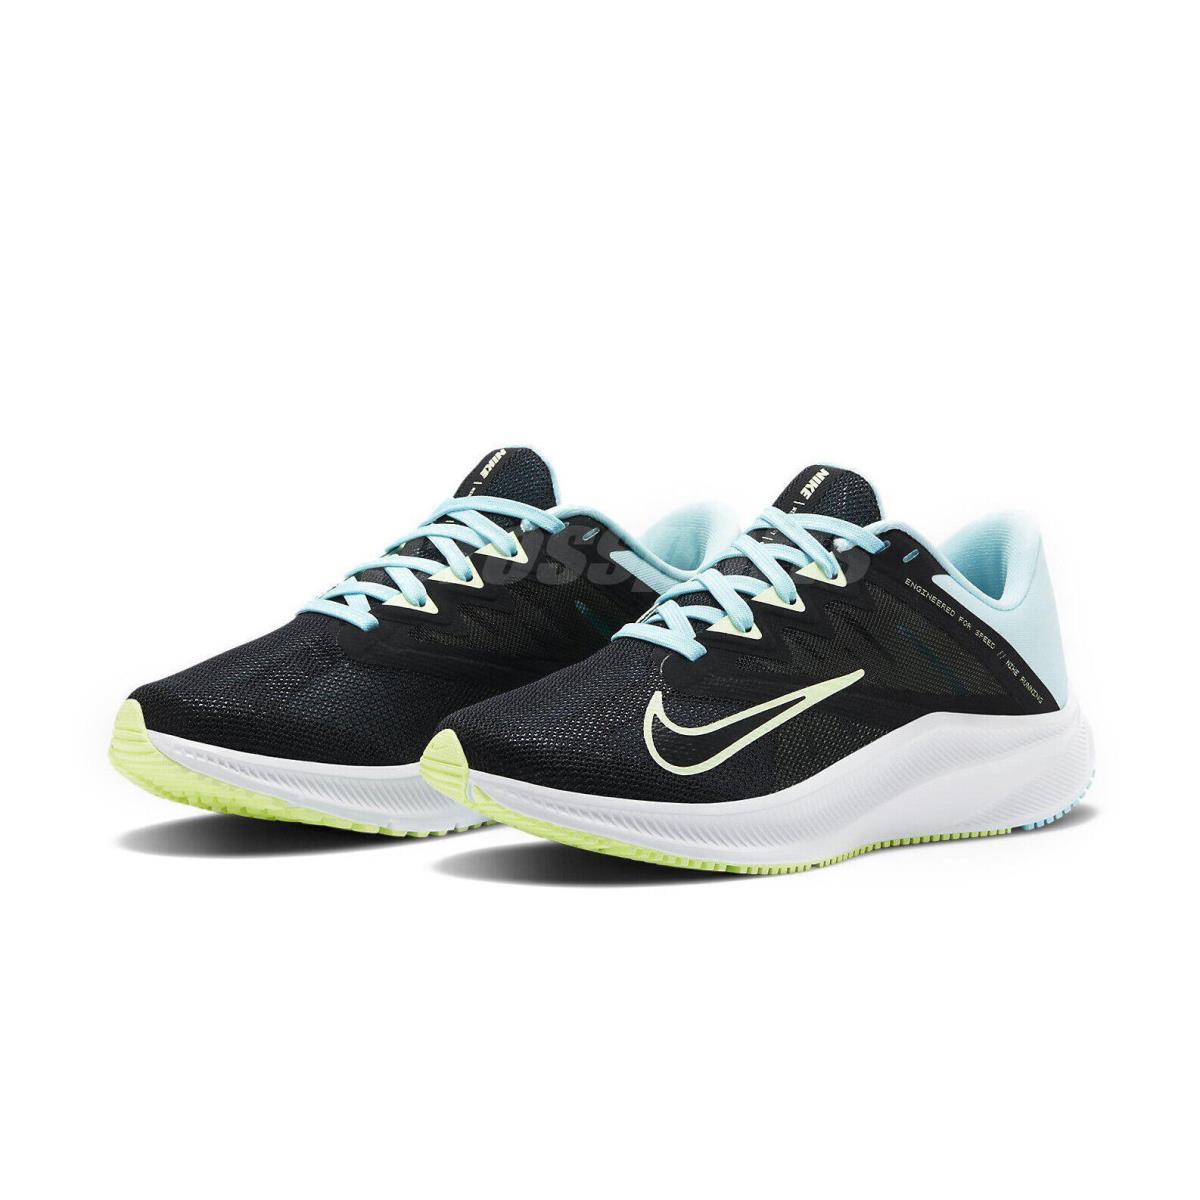 7.5 Nike Woman`s Quest 3 Black Glacier Ice Running Shoes CD0232-005 Size 7.5NEW